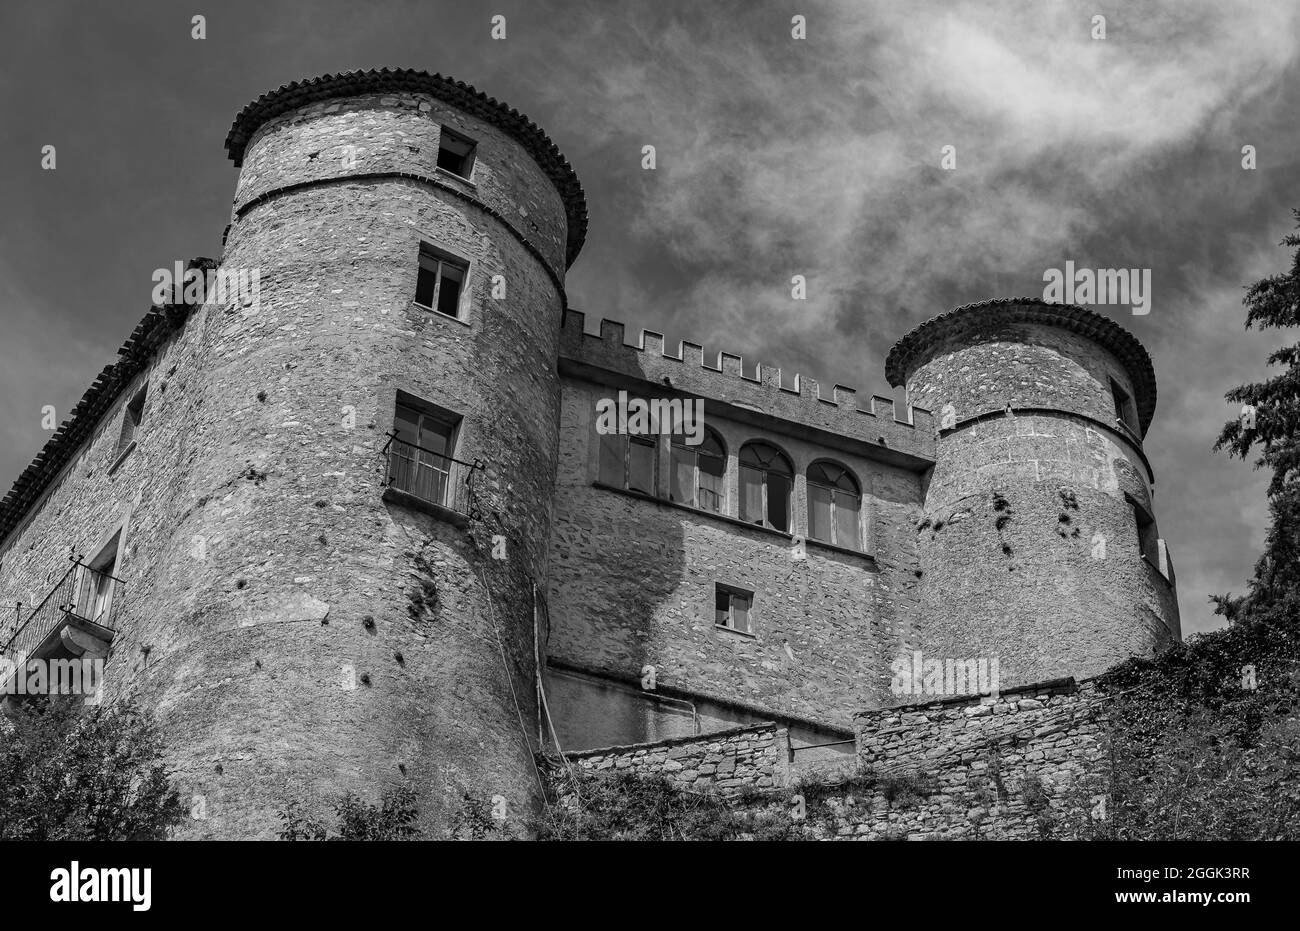 The Castle of Carpinone was probably built in the Norman period and from the time of its construction until the end of the thirteenth century the buil Stock Photo